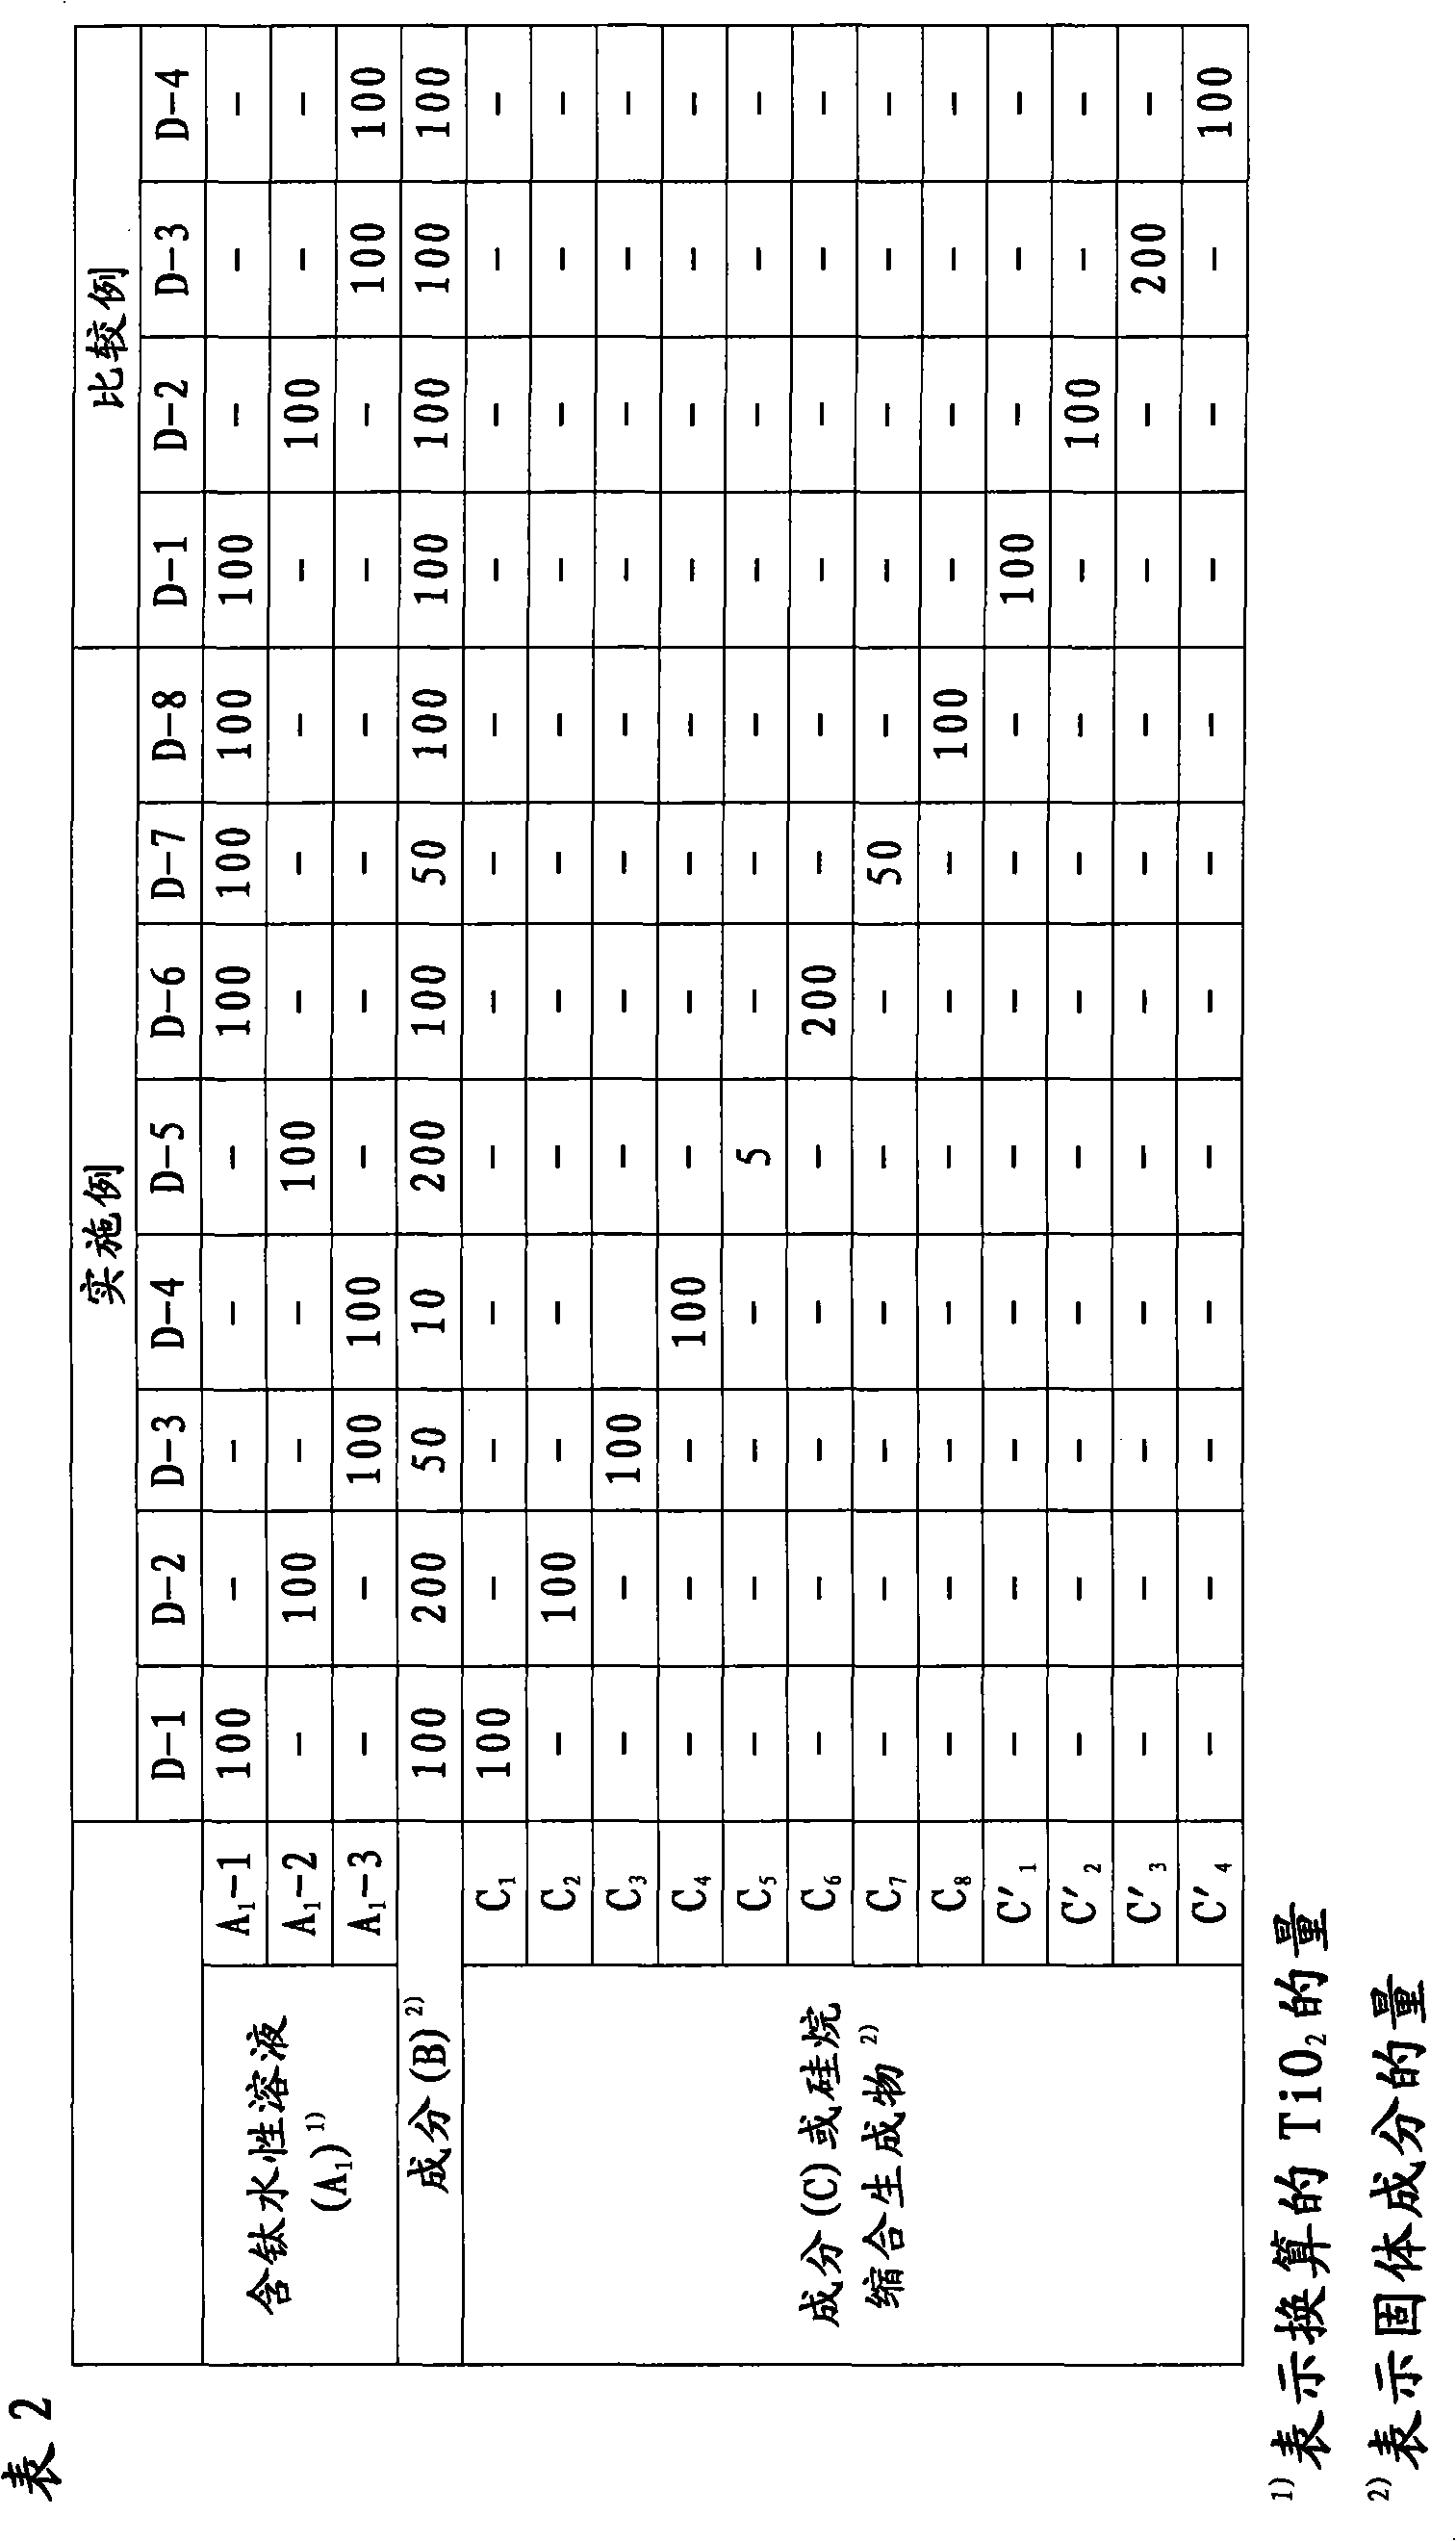 Composition for metallic surface treatment and metallic base material with surface treatment envelope